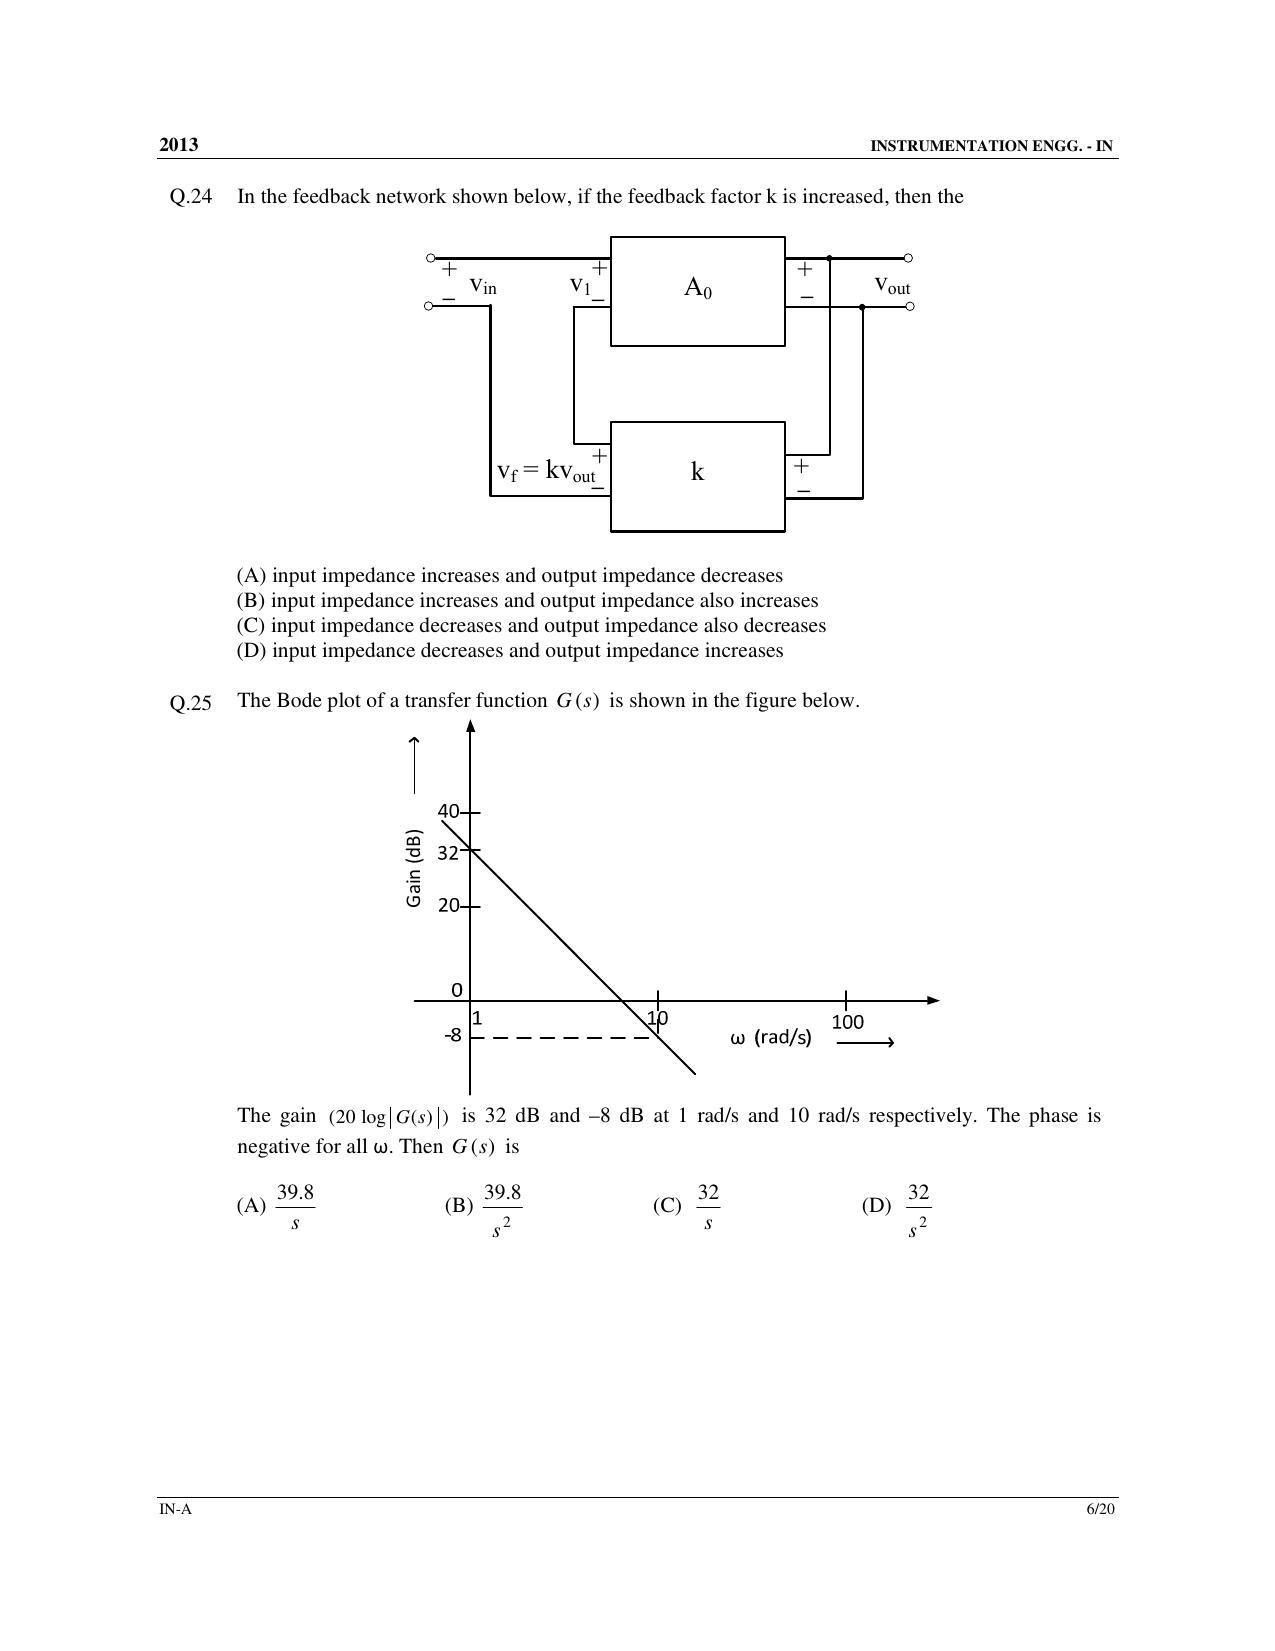 GATE 2013 Instrumentation Engineering (IN) Question Paper with Answer Key - Page 7